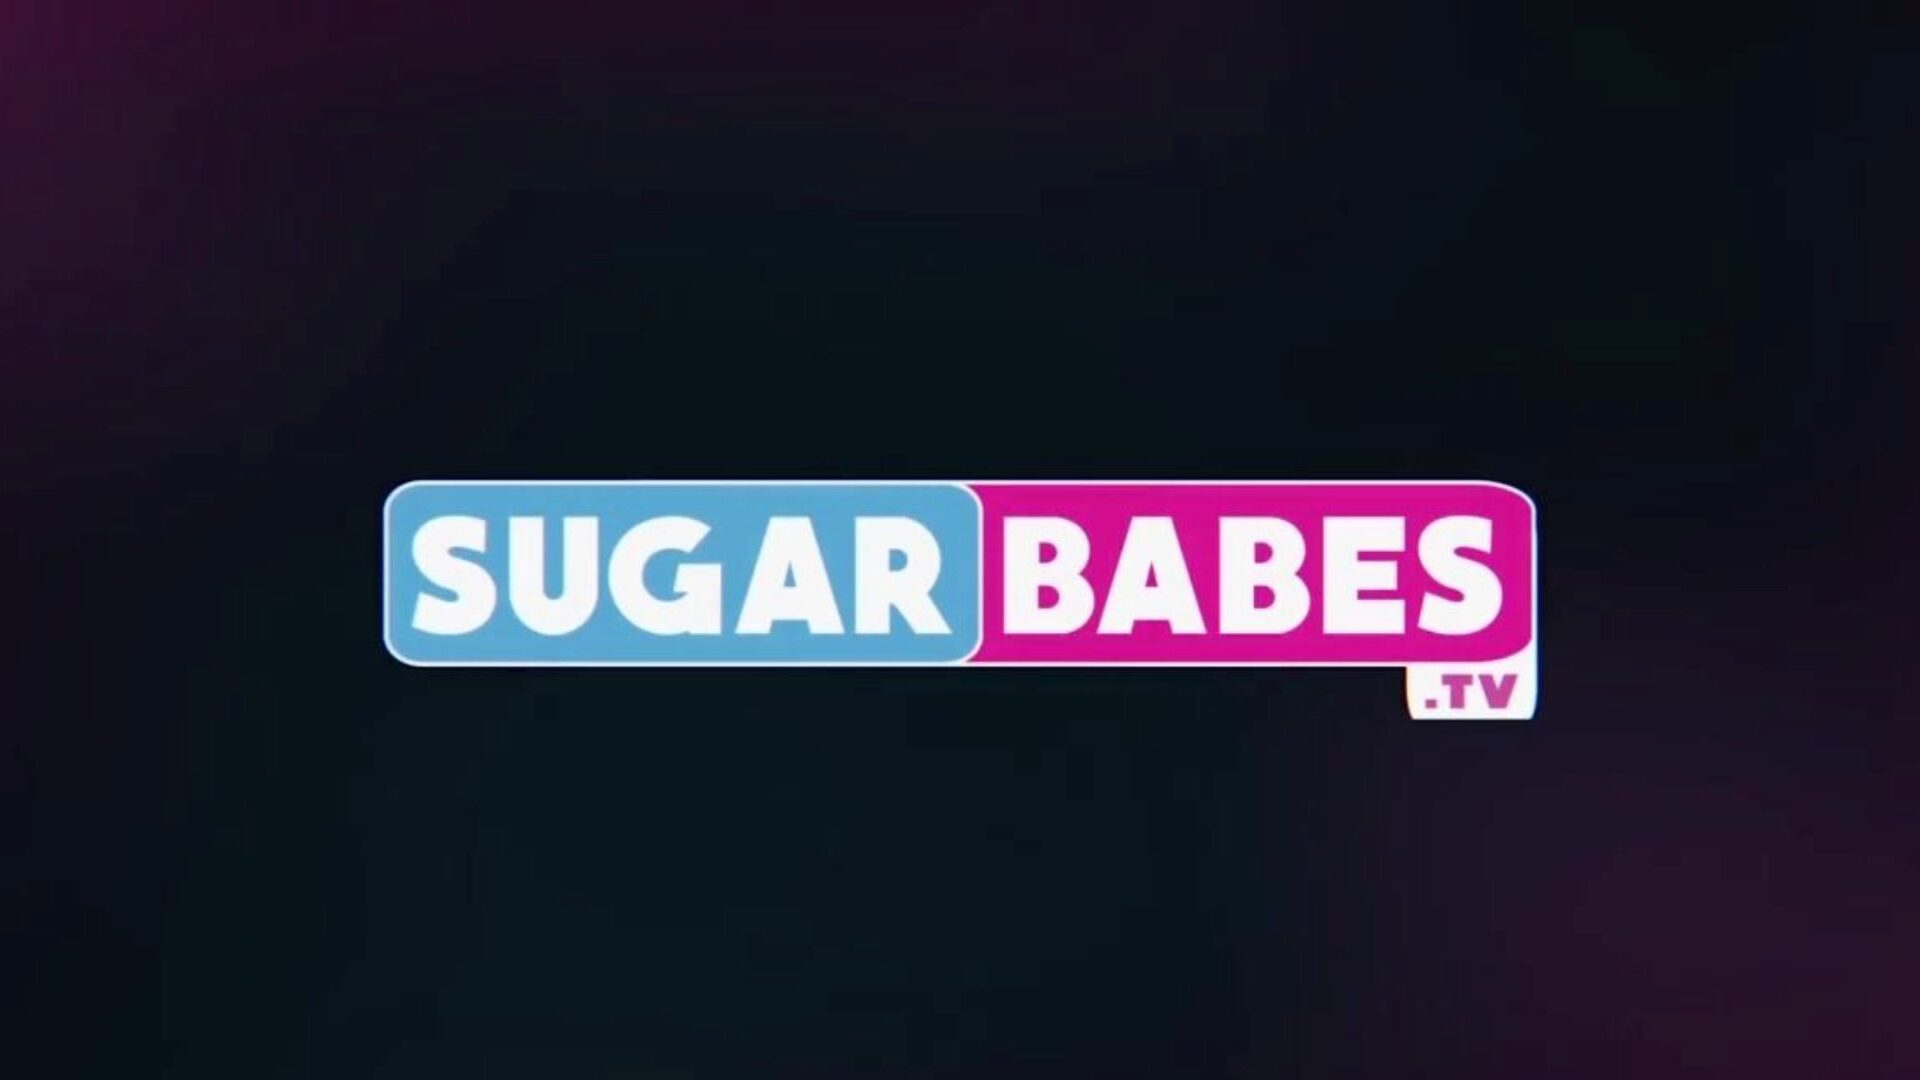 Sugarbabestv the Bottle, Free Sugar hotties TV HD Porn 6b Watch Sugarbabestv the Bottle video on xHamster, the greatest HD fucky-fucky tube website with tons of free-for-all Sugar chicks TV Lesbian Sex & Love porn movie scenes